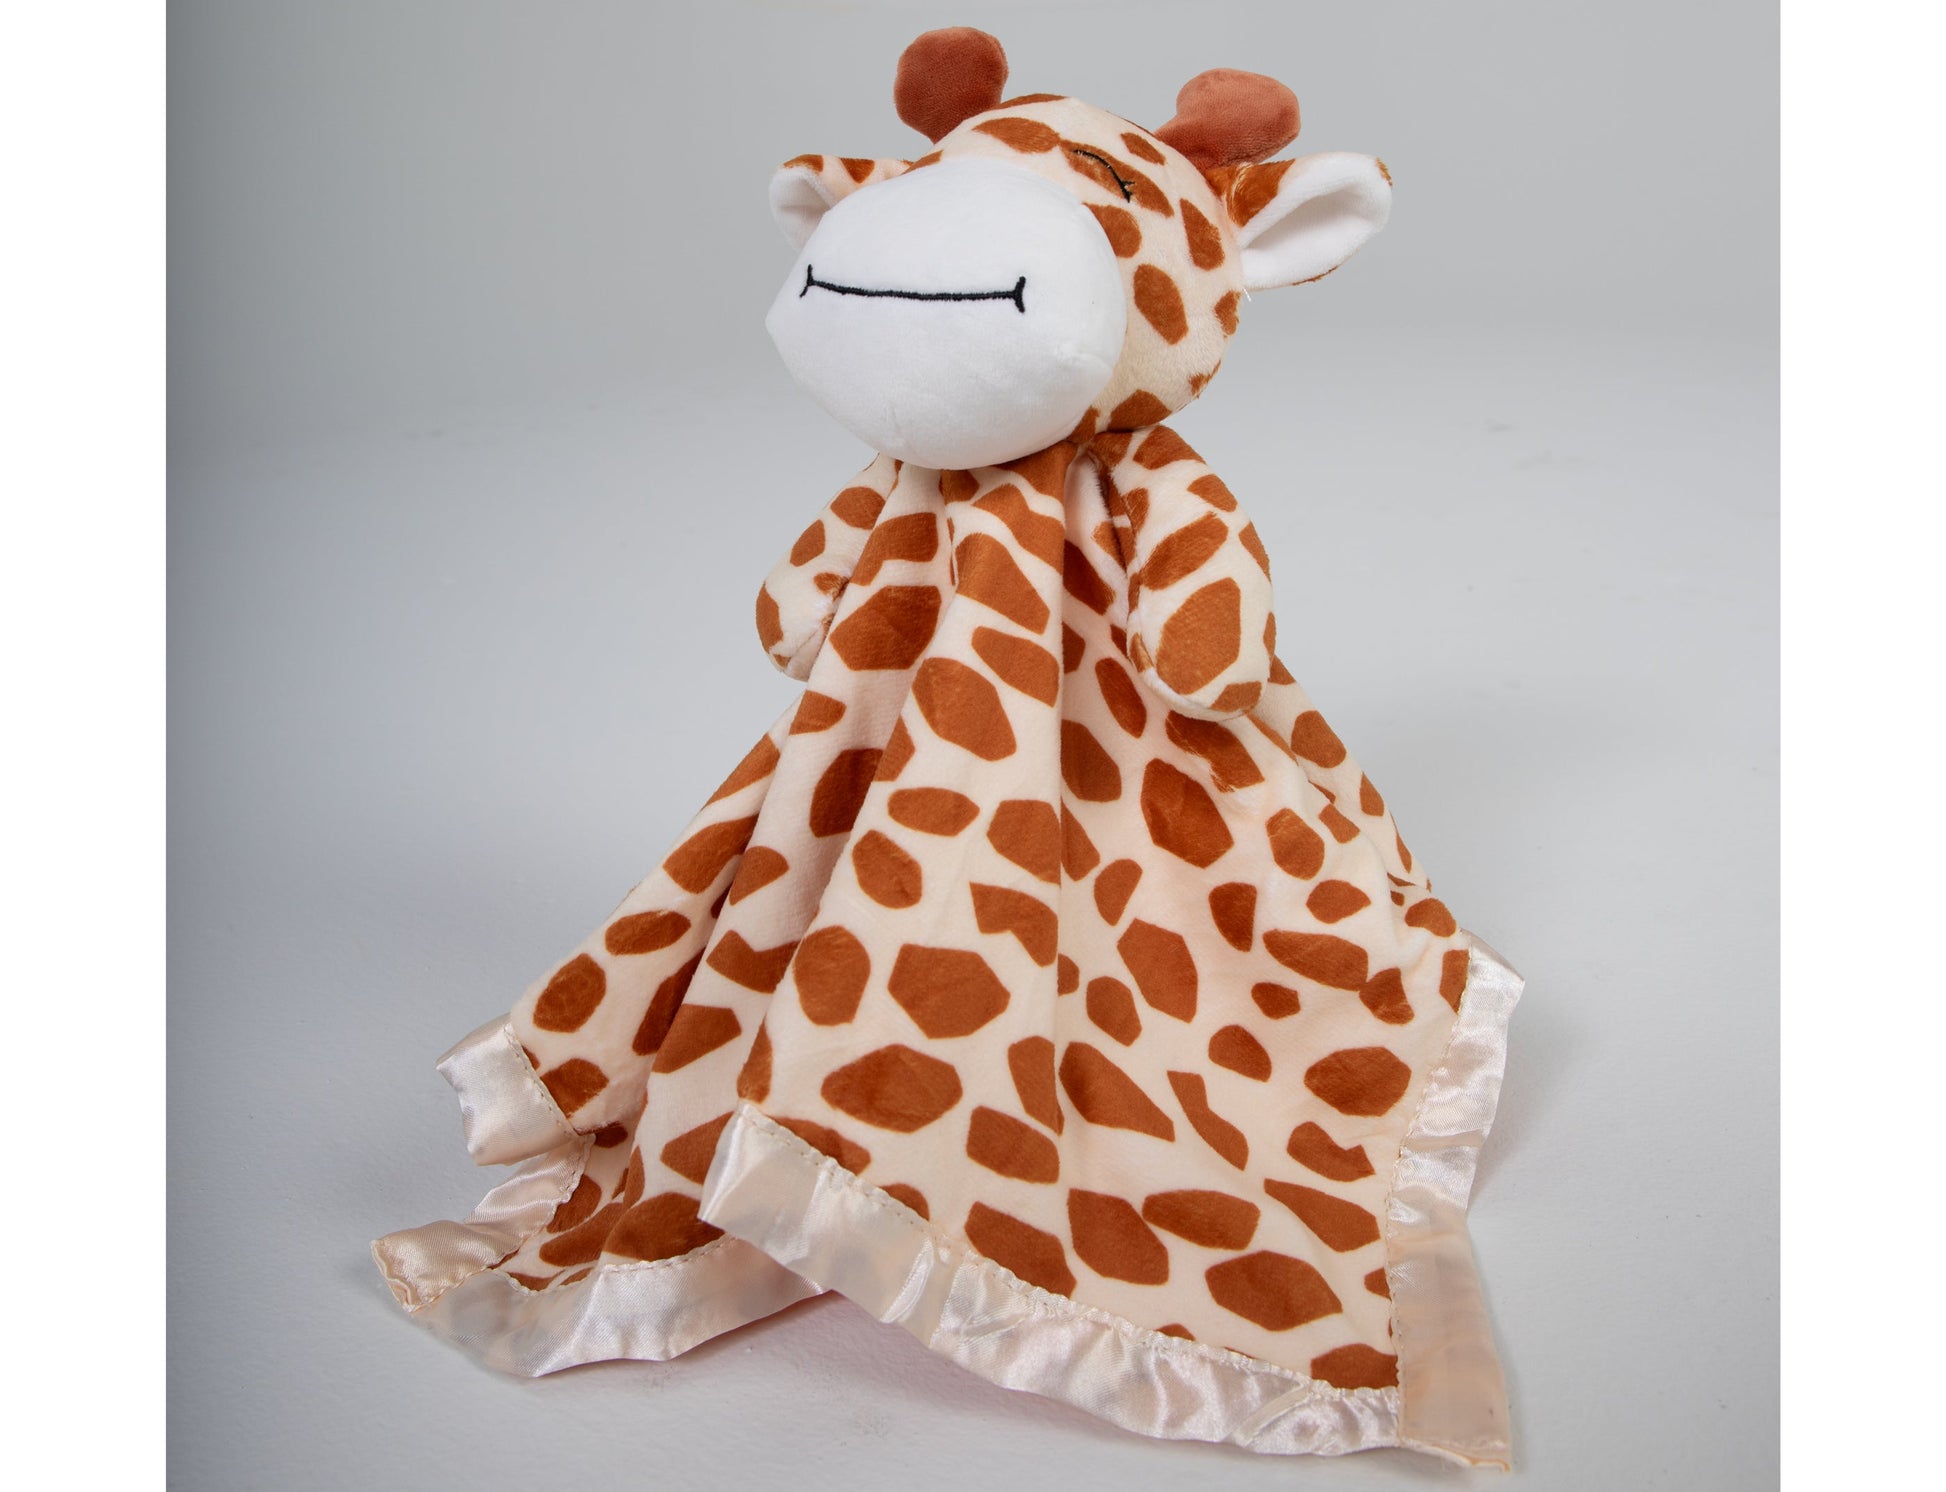 Our adorable stuffed giraffe lovey and security blanket companion is the perfect cuddly friend for your baby. Crafted with love, it's sure to provide comfort and companionship throughout the early years.  Made of soft plush and lined with satin this lovable animal is sure to be your baby's new best friend.